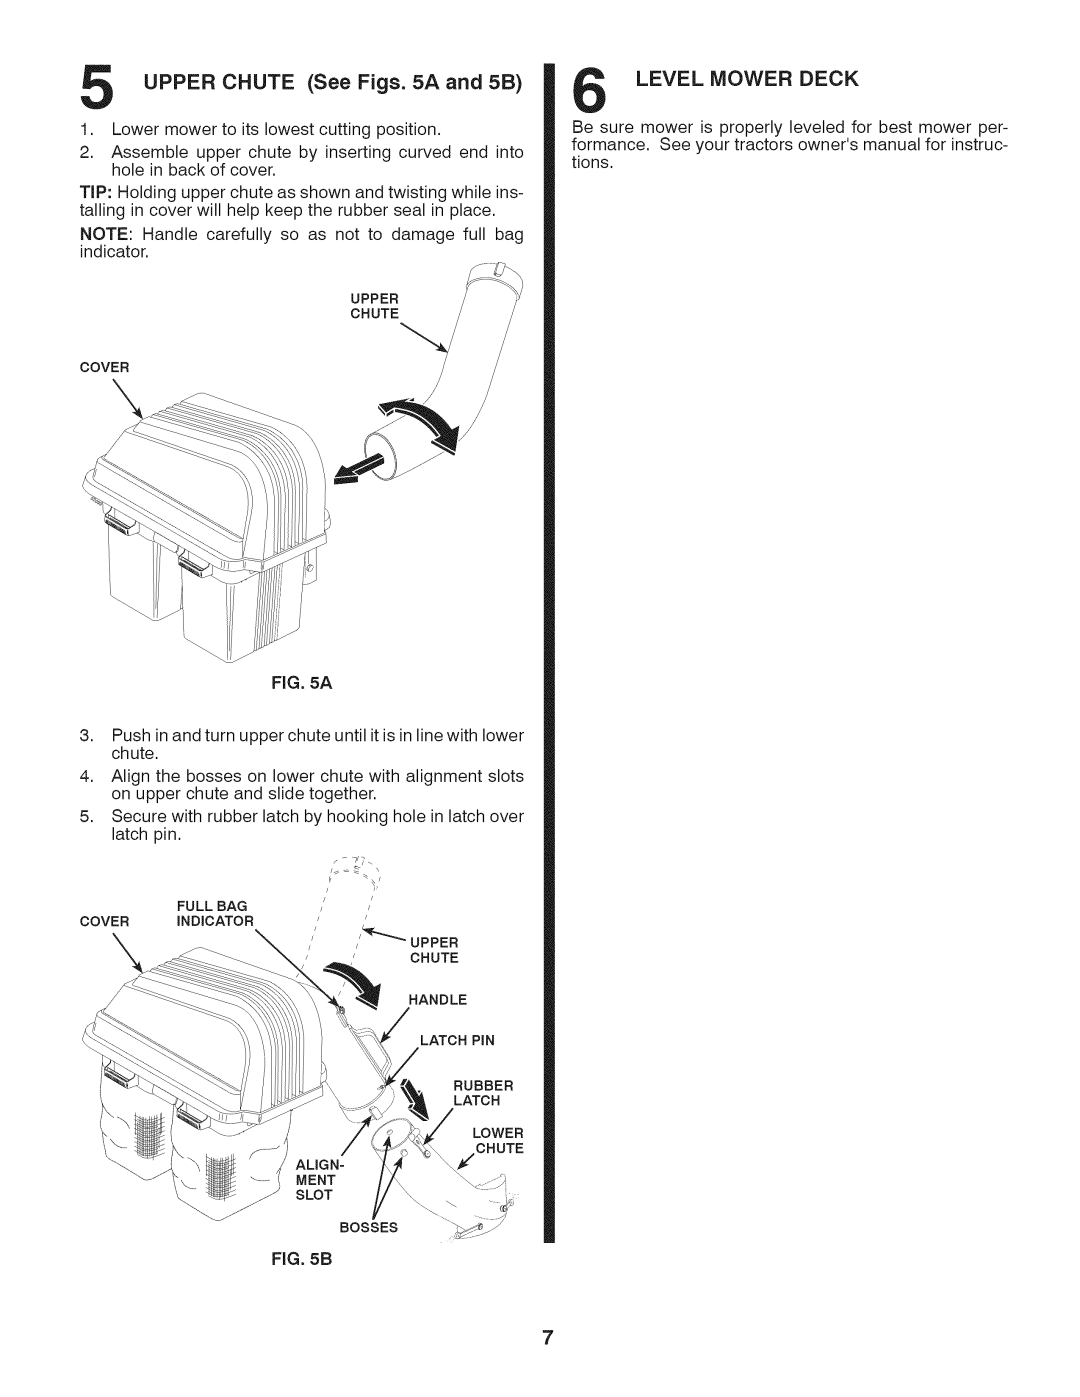 Craftsman 917.24903 owner manual UPPER CHUTE See Figs. 5A and 5B, Level Mower Deck 